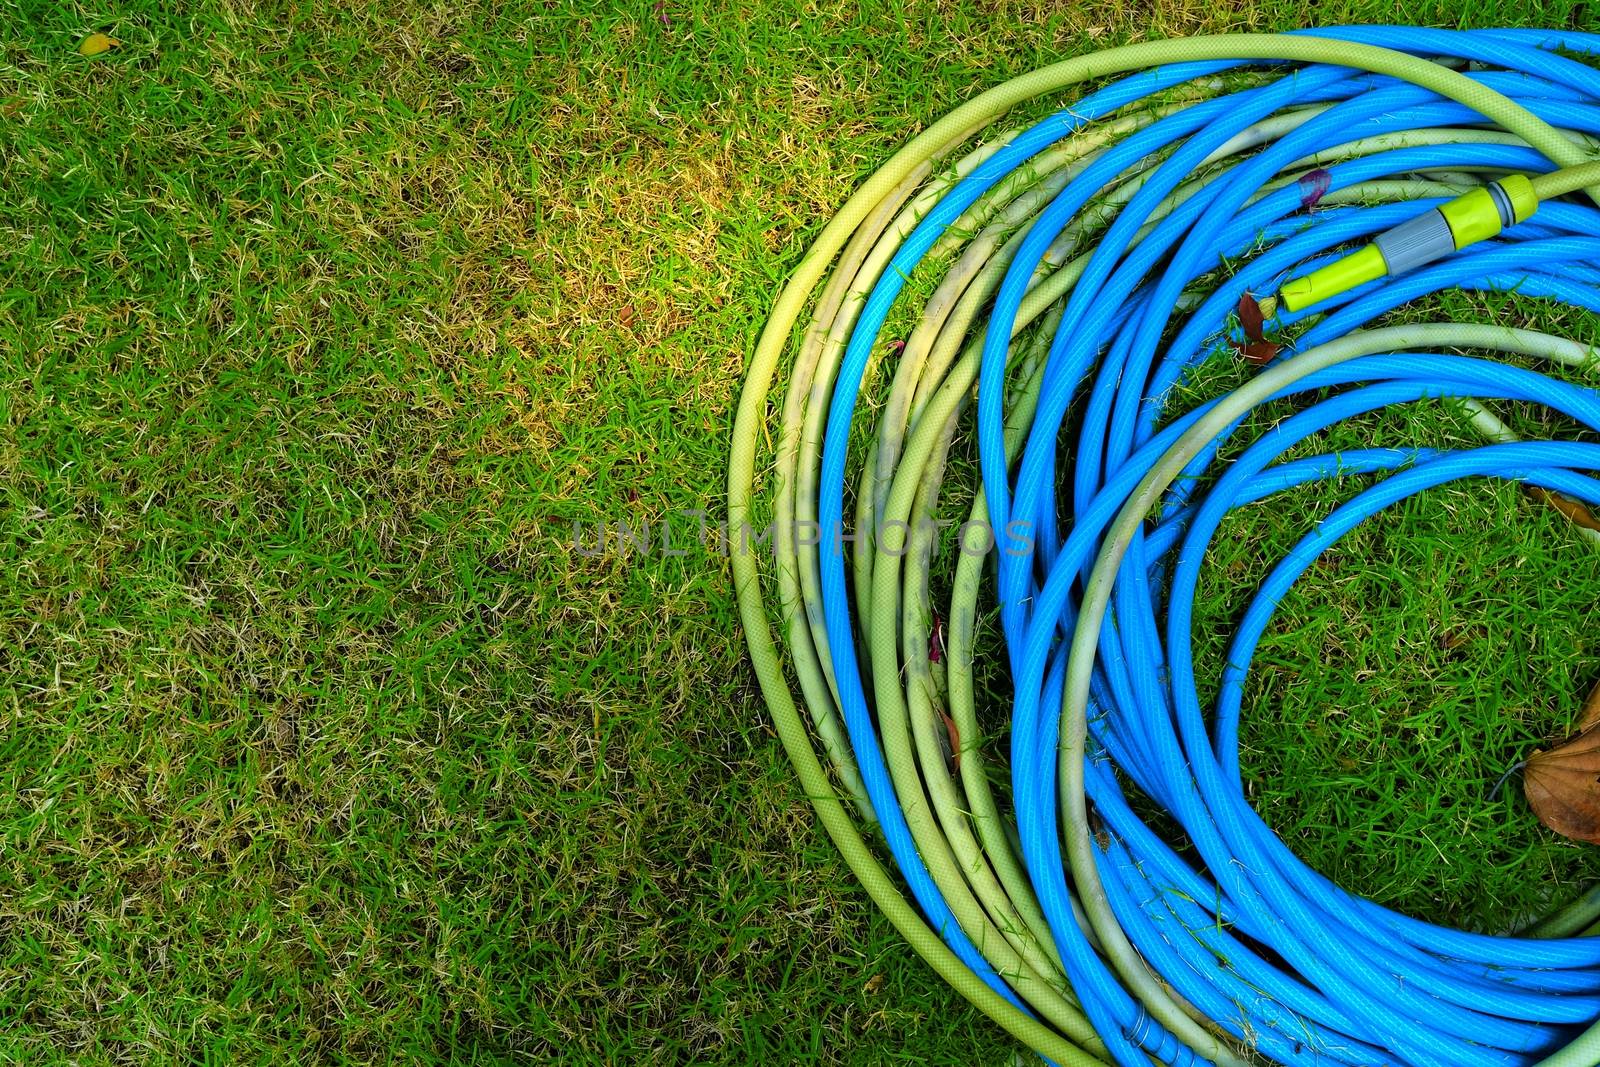 Closed-up Garden Hose on Grass. by mesamong